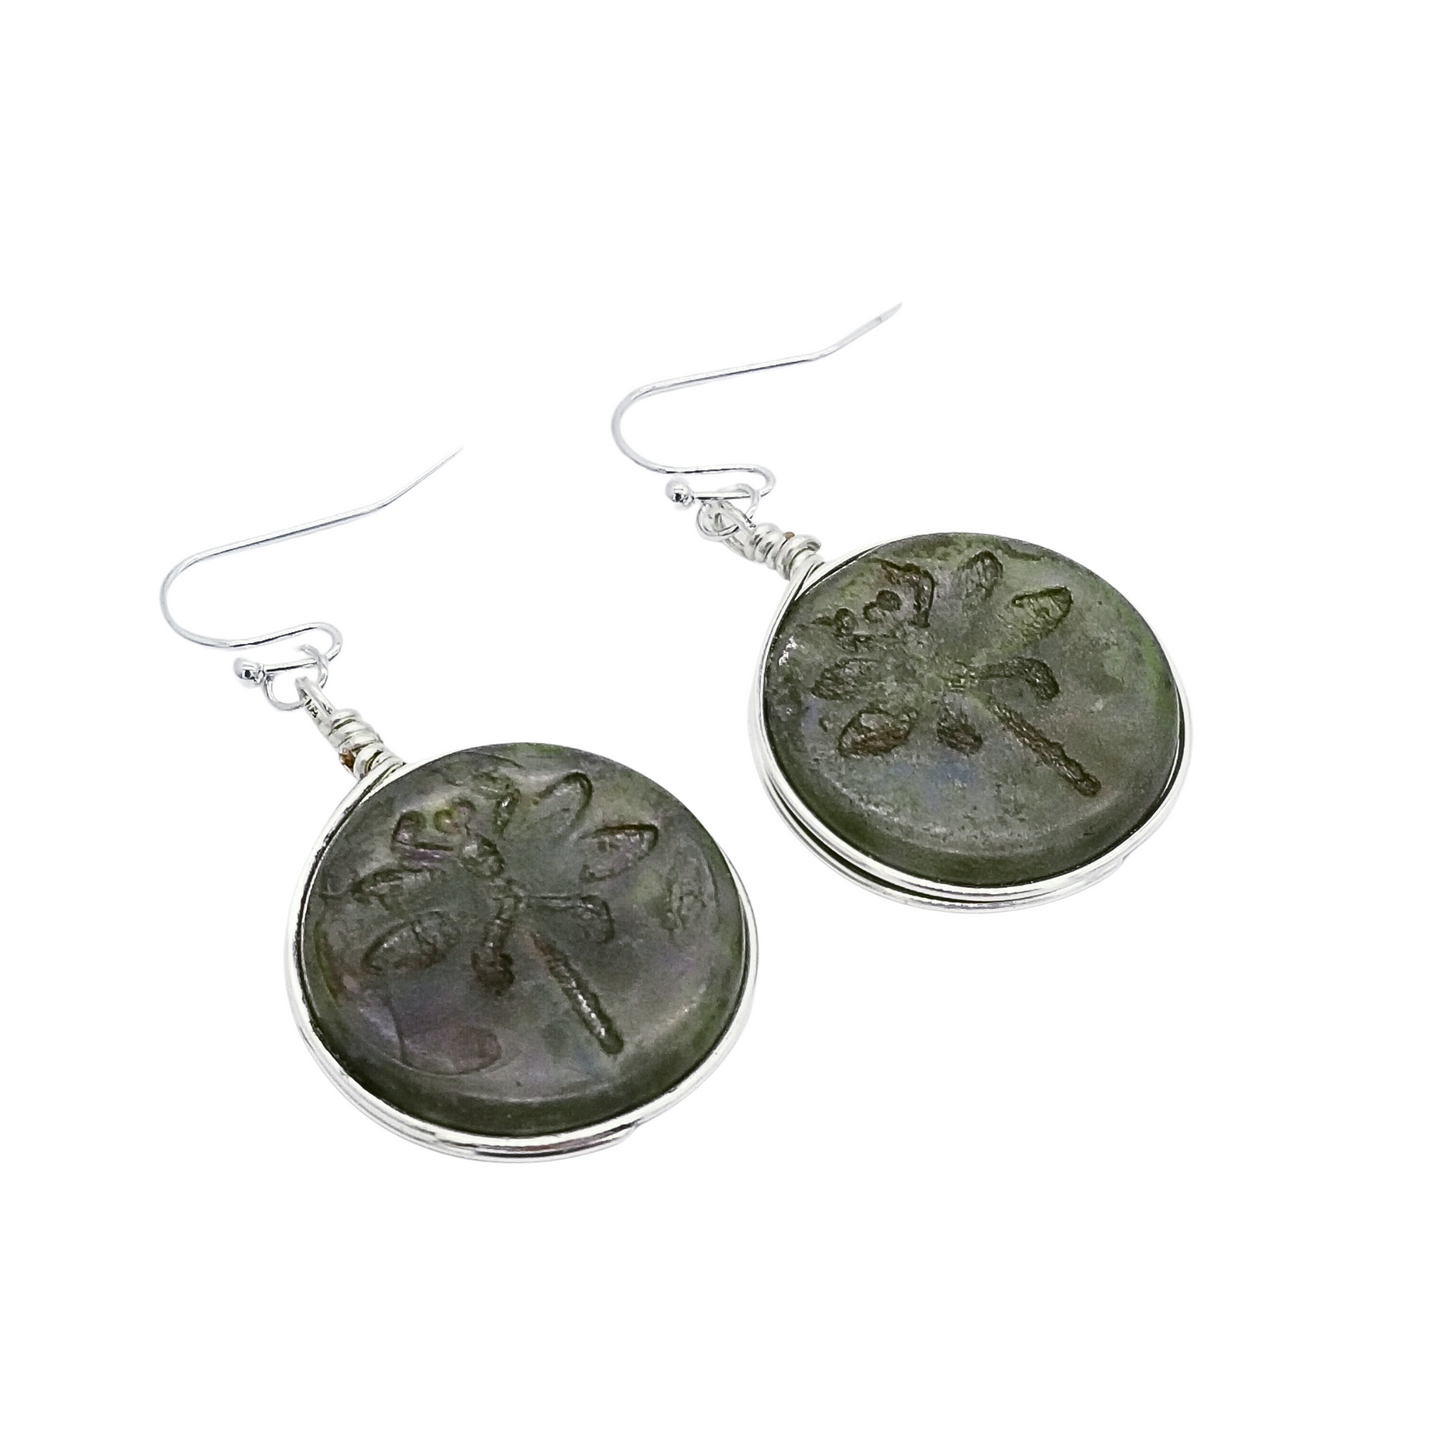 Dragonfly Earrings, Dragonfly Gift, Everyday Jewelry